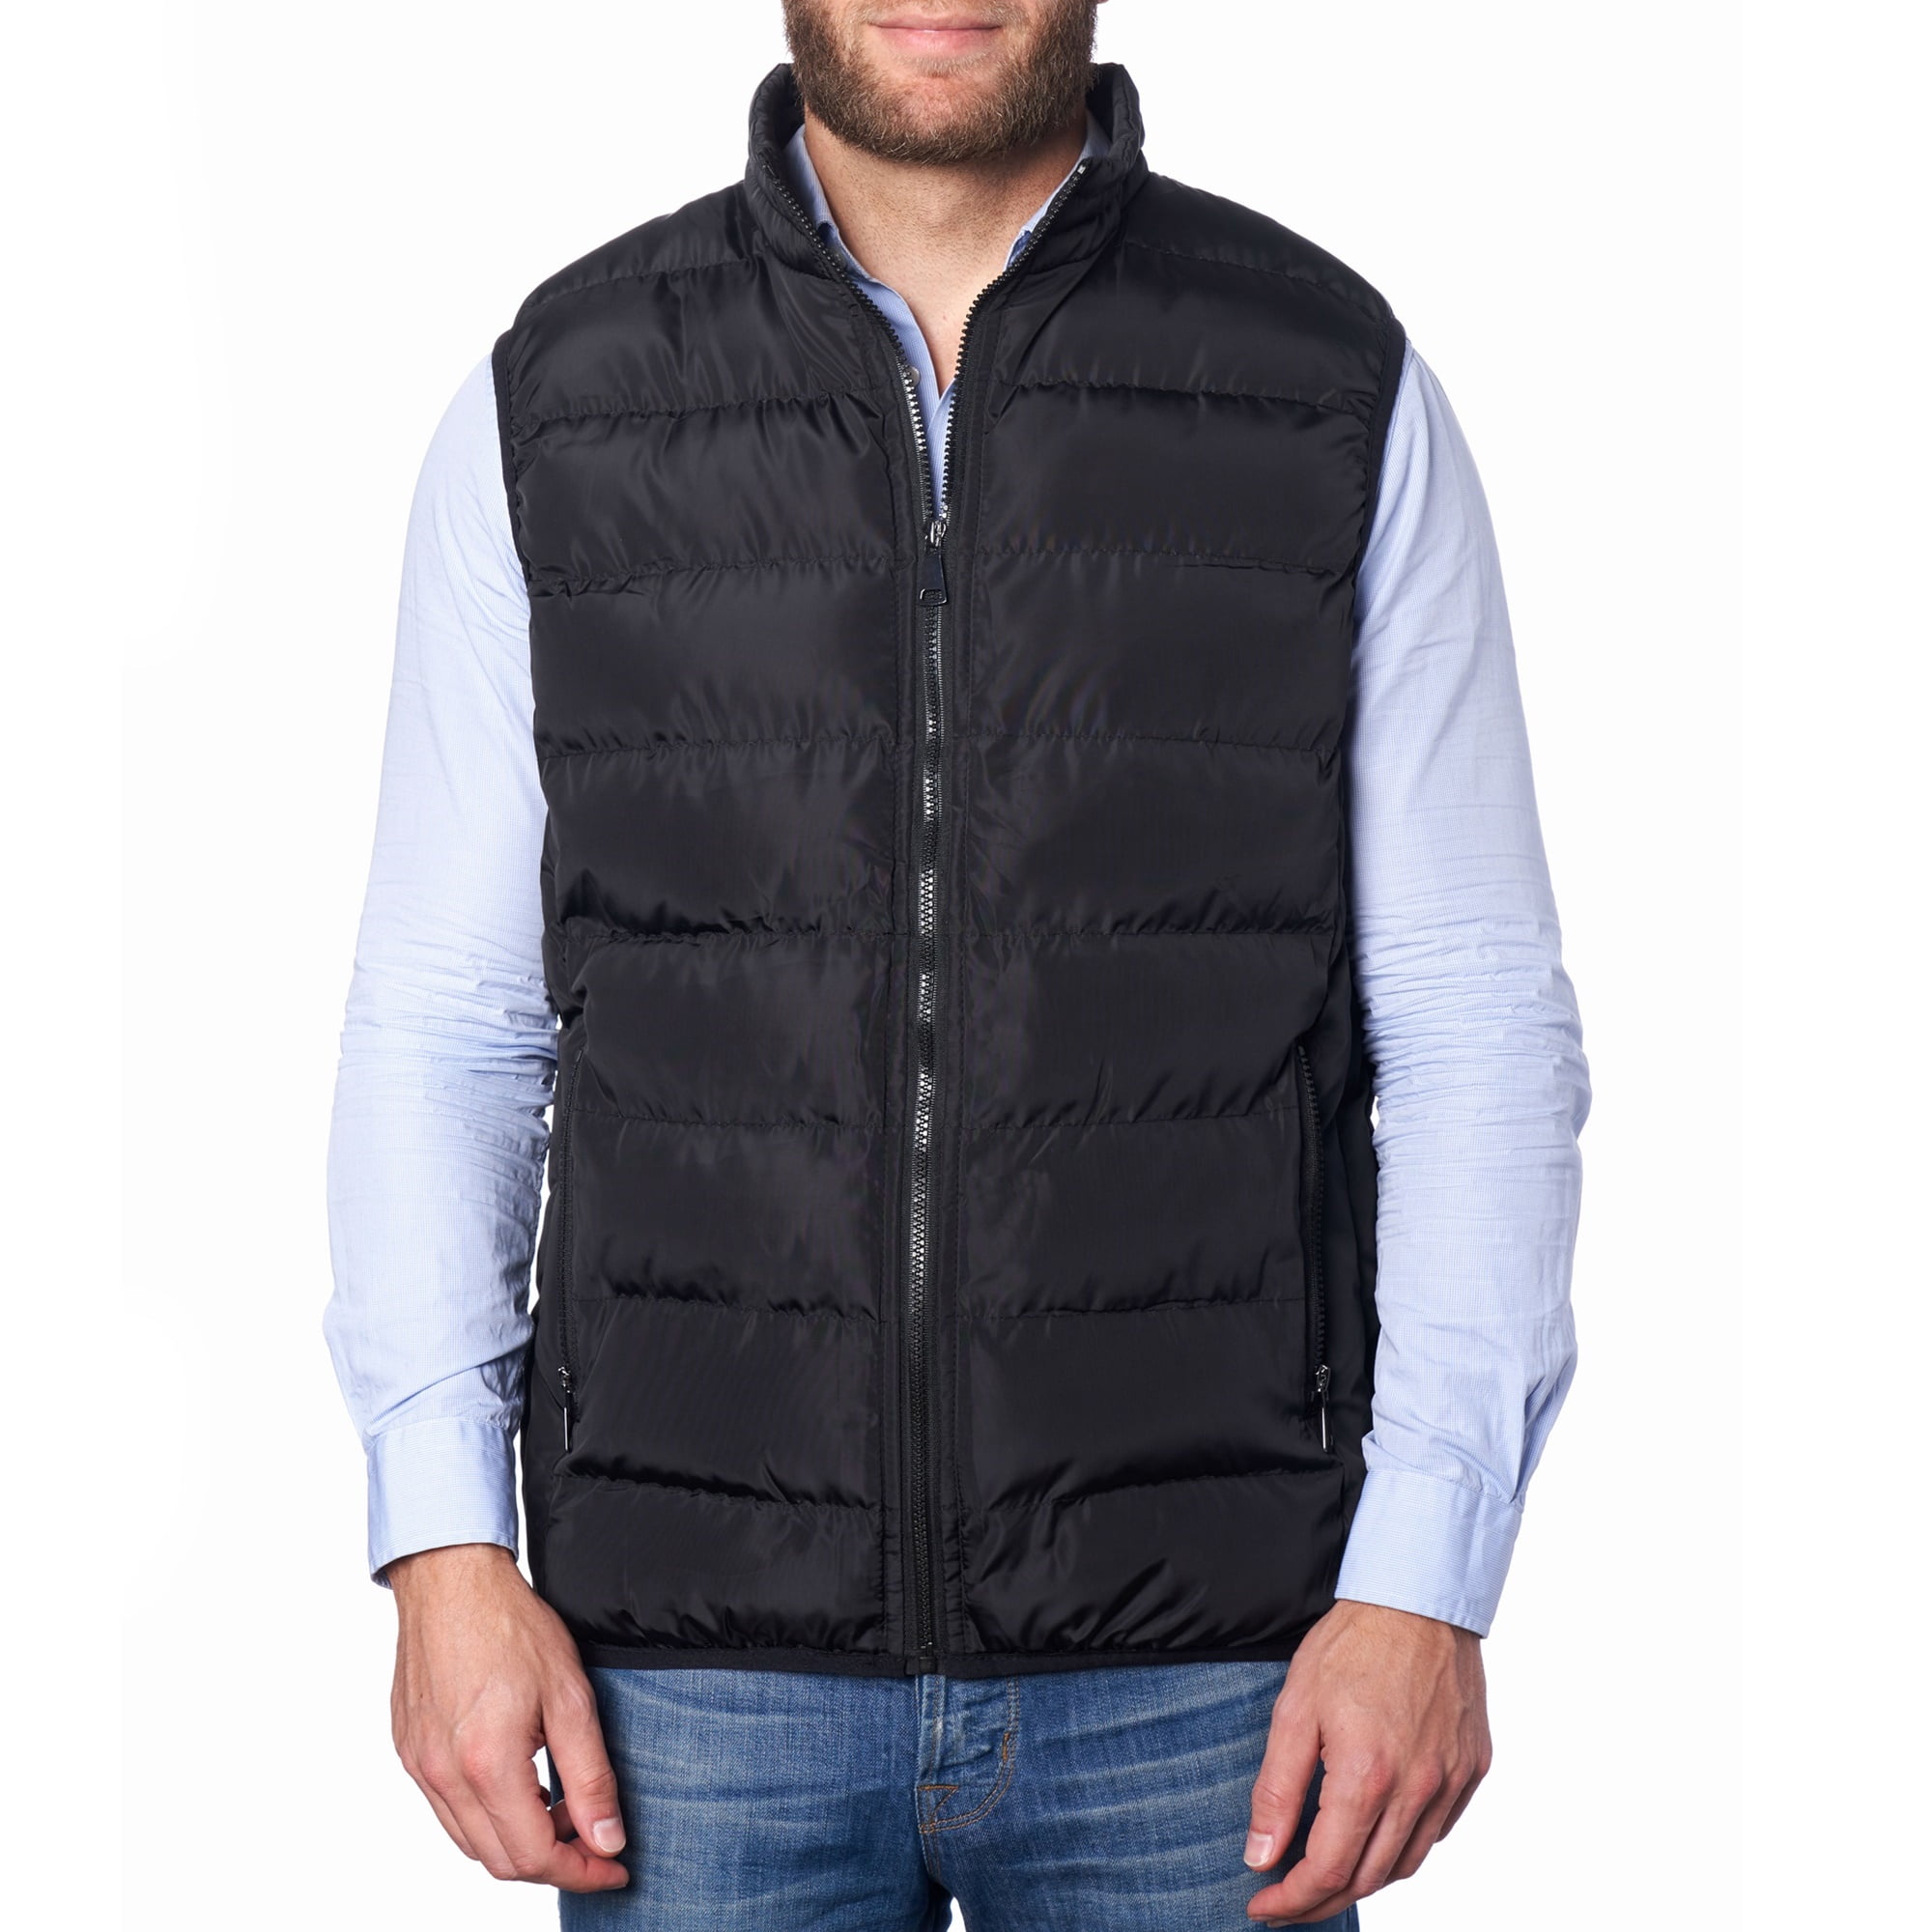 Mywu Mens Spring Fall Vest Puffer Lightweight Stand Collar Quilted Sleeveless Jackets 